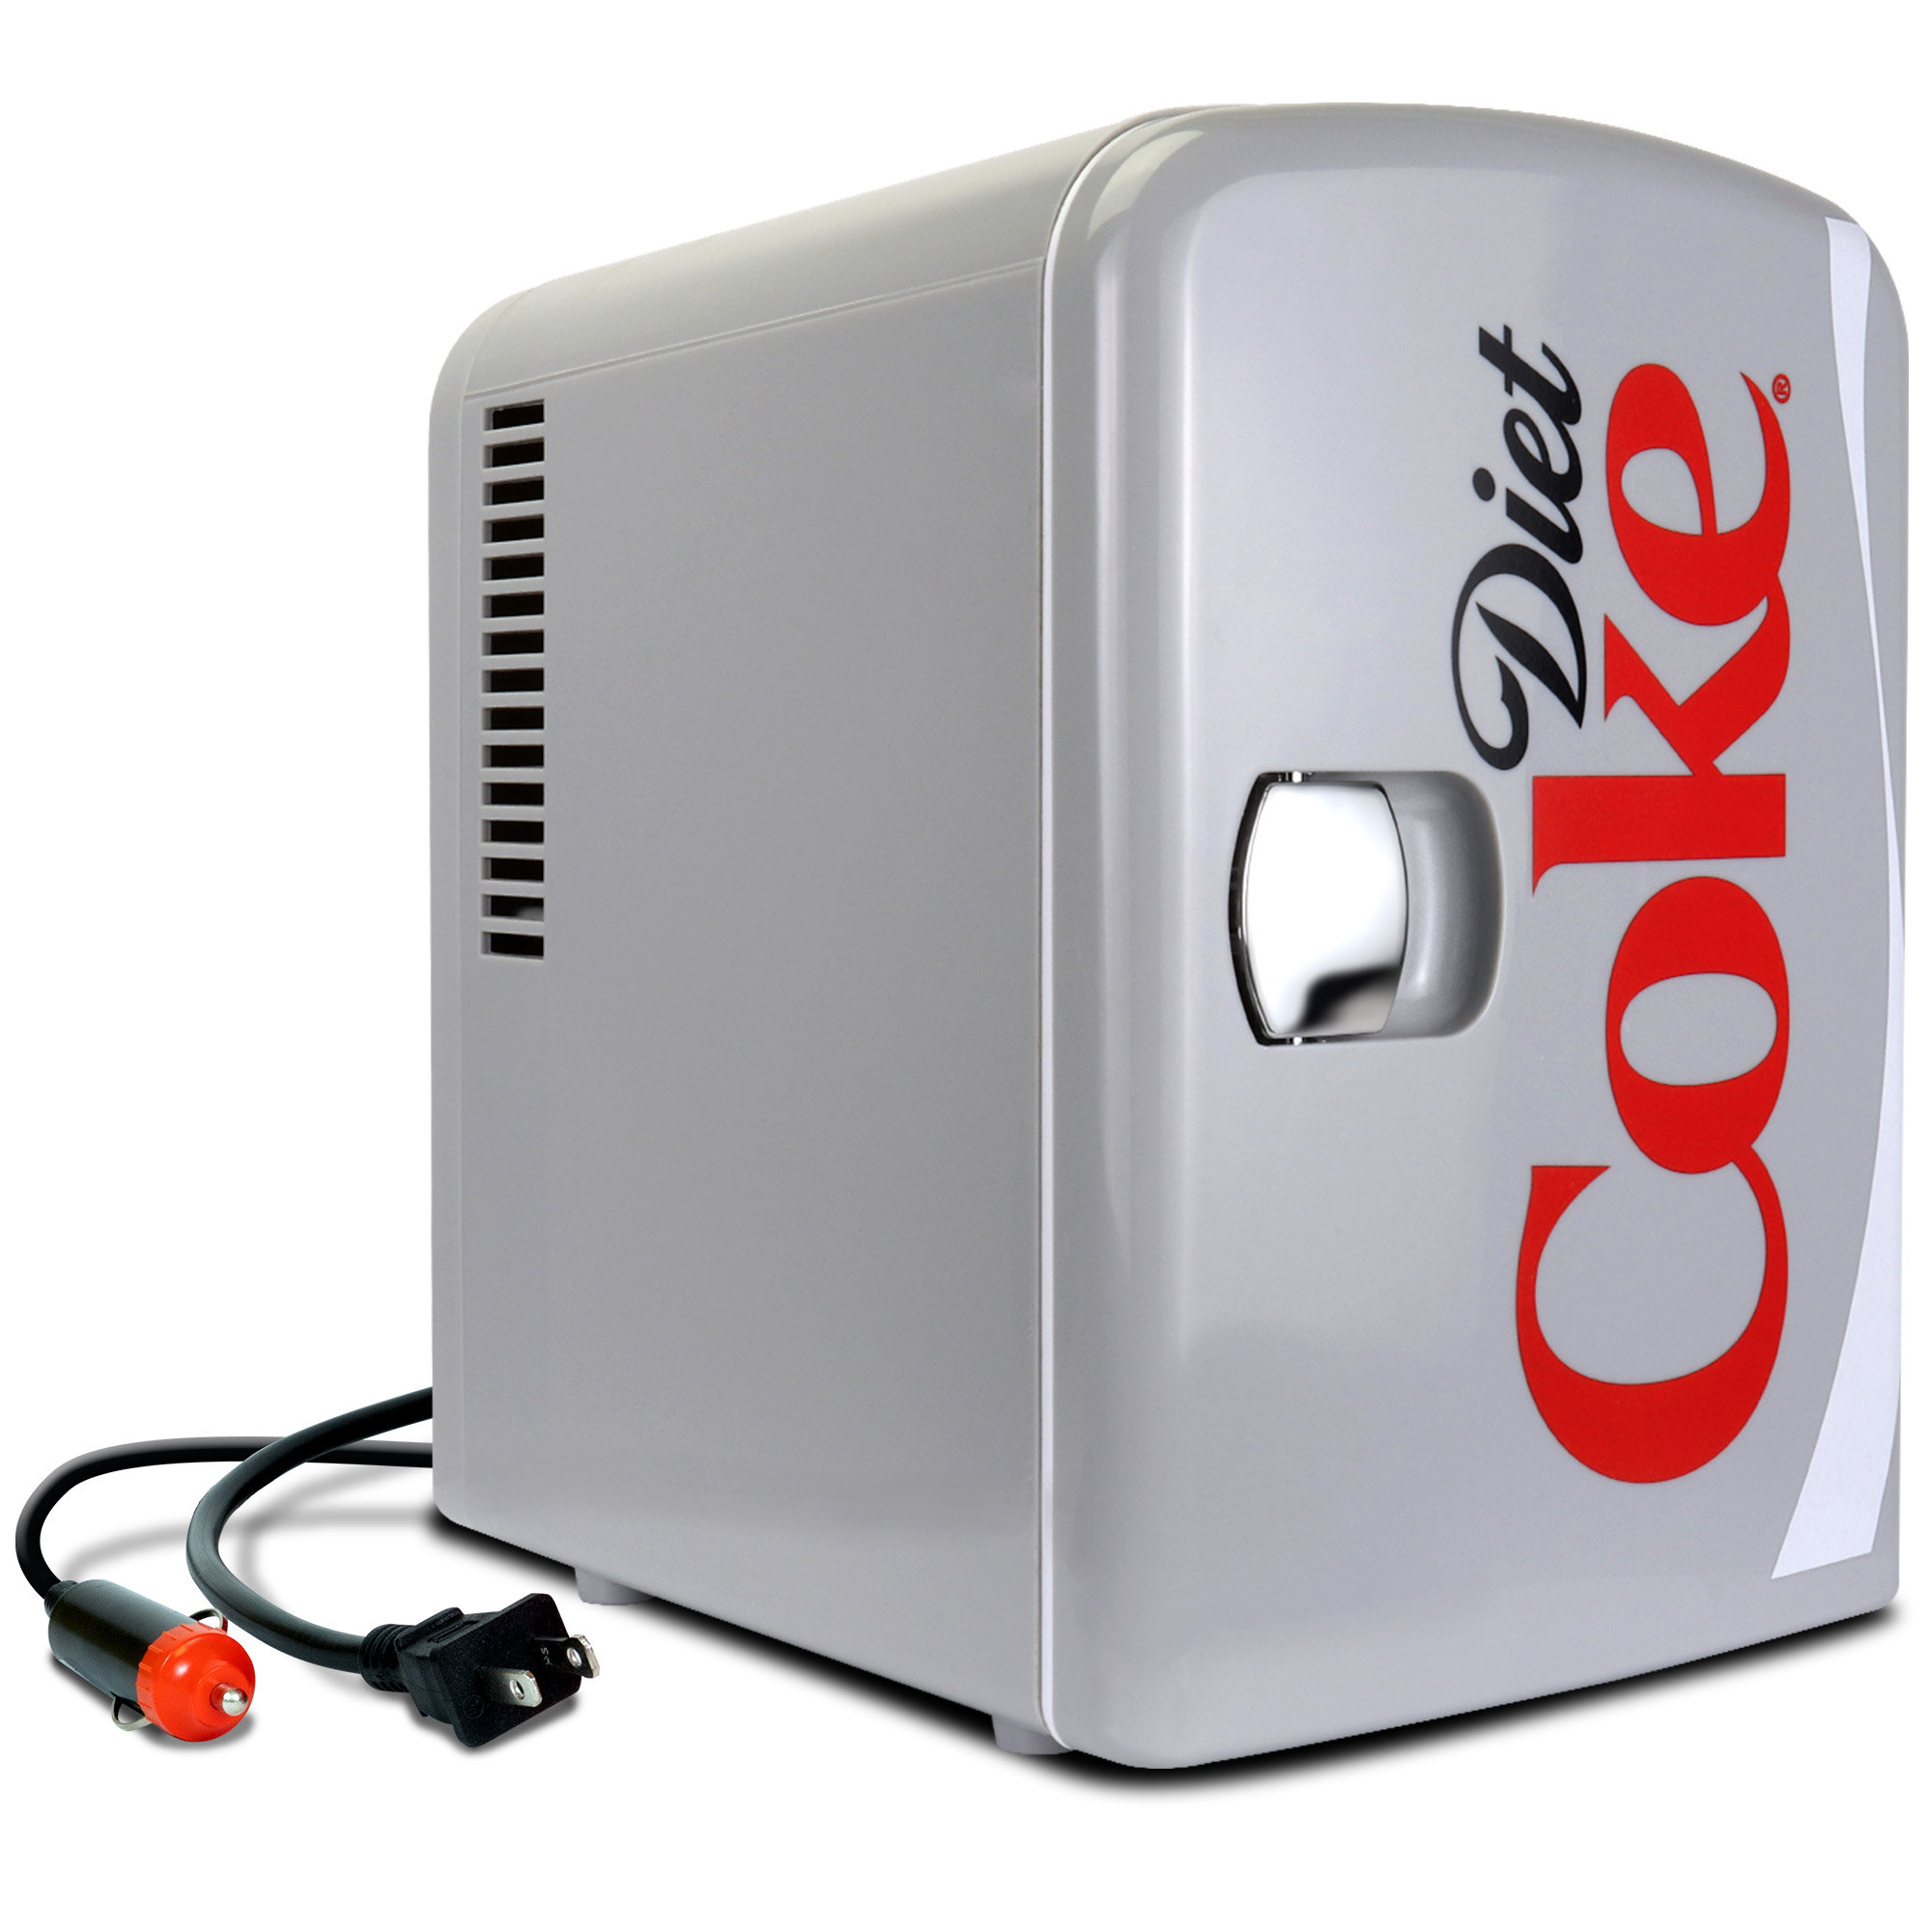 Crownful Portable Cooler And Heater Mini Fridge for Sale in